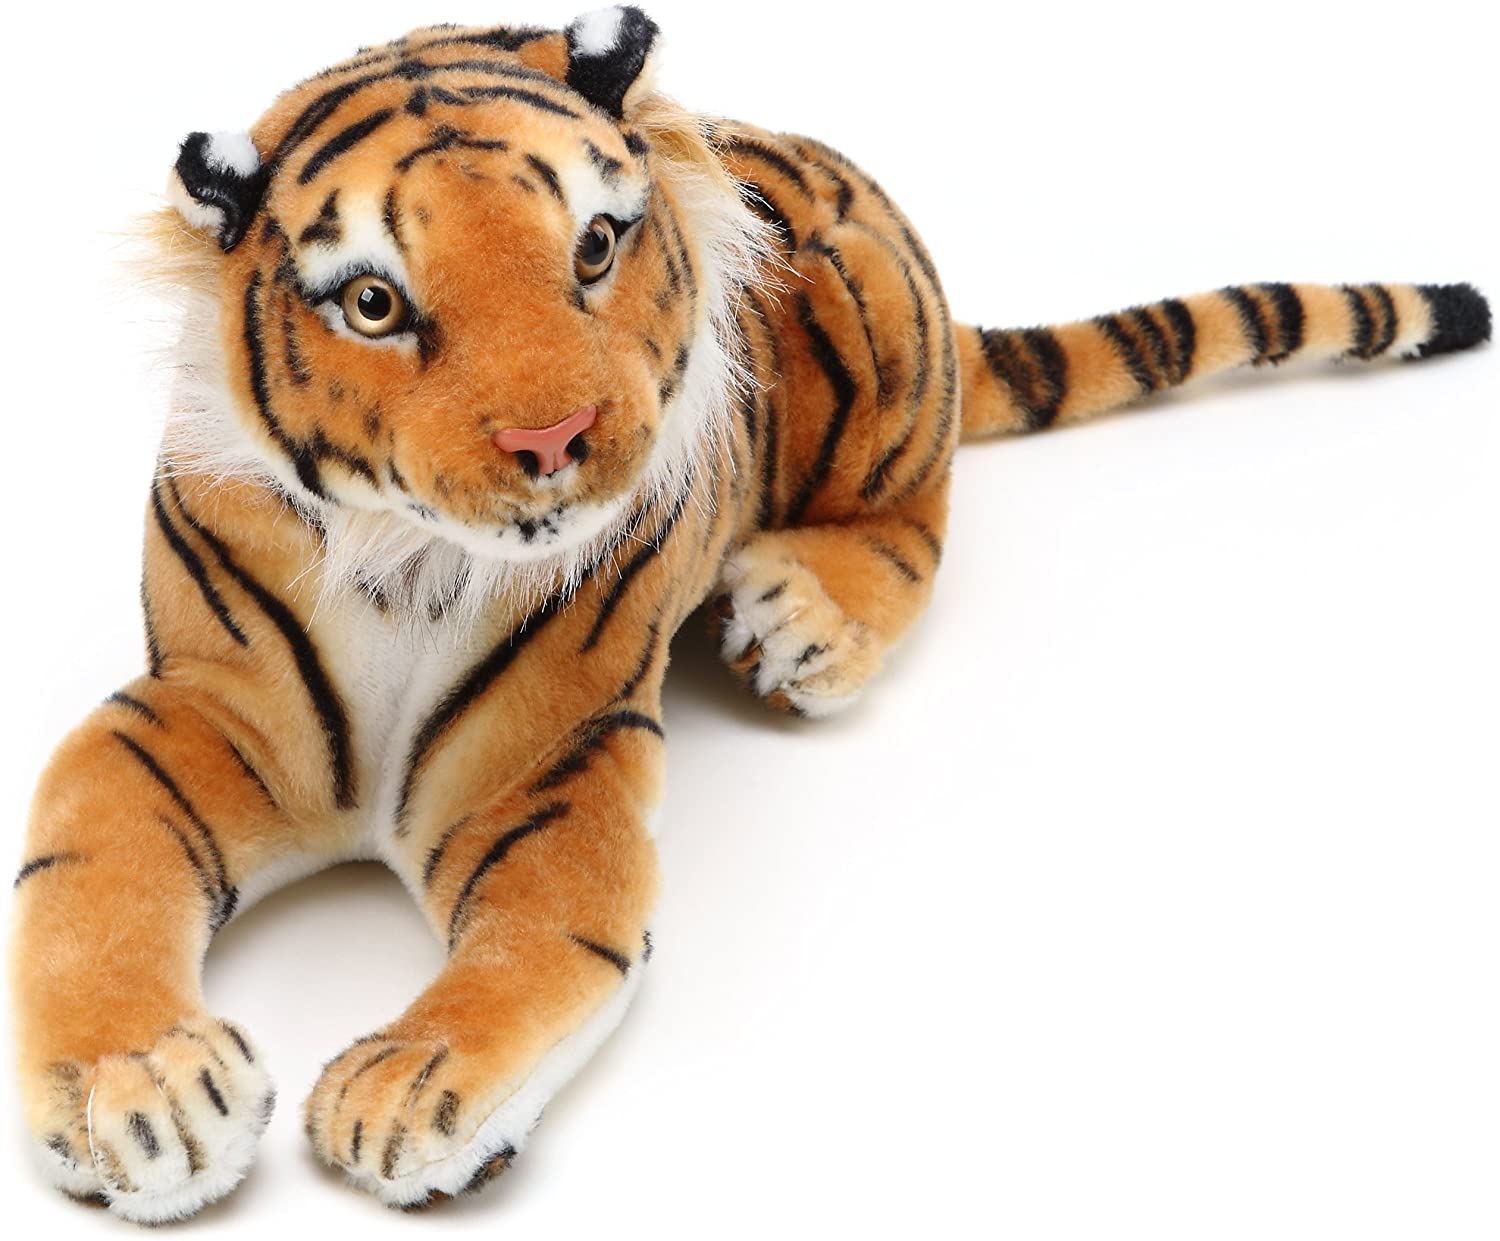 VIAHART Arrow The Tiger | 17 Inch (Tail Measurement Not Included!) Stuffed Animal Plush Cat | by Tiger Tale Toys